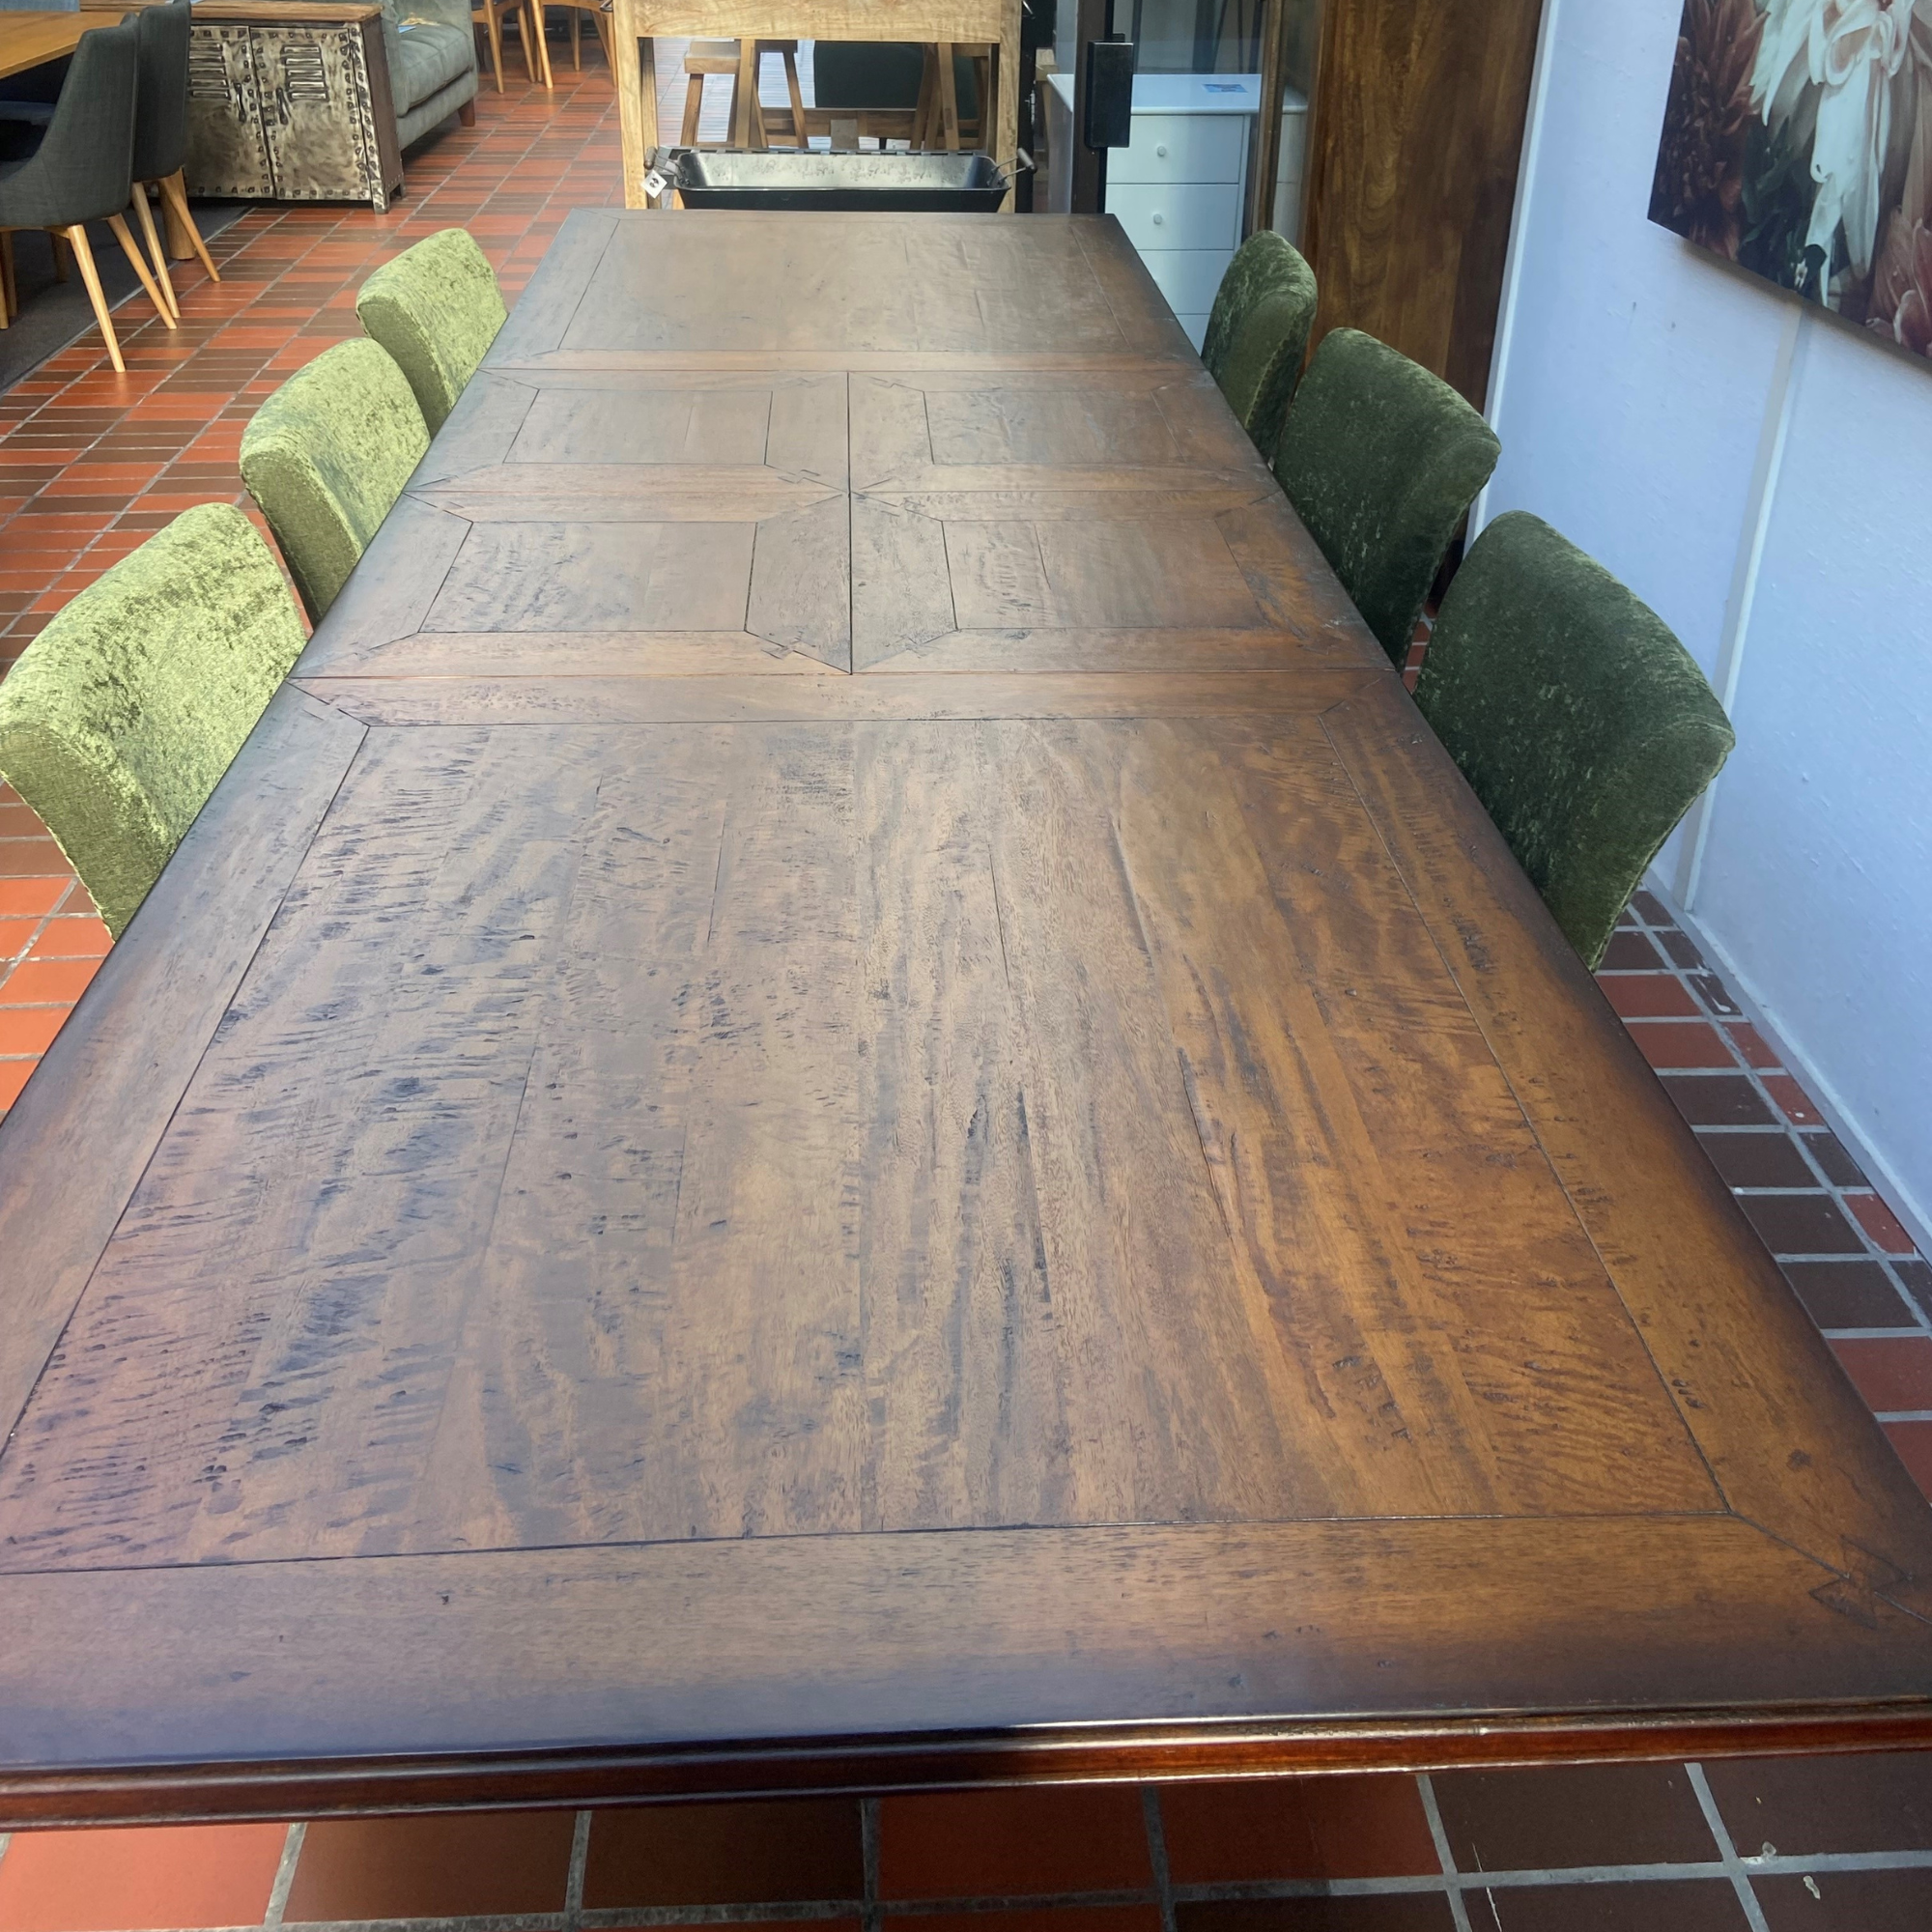 BOSQUET HUGE DOUBLE EXTENDING DINING TABLE